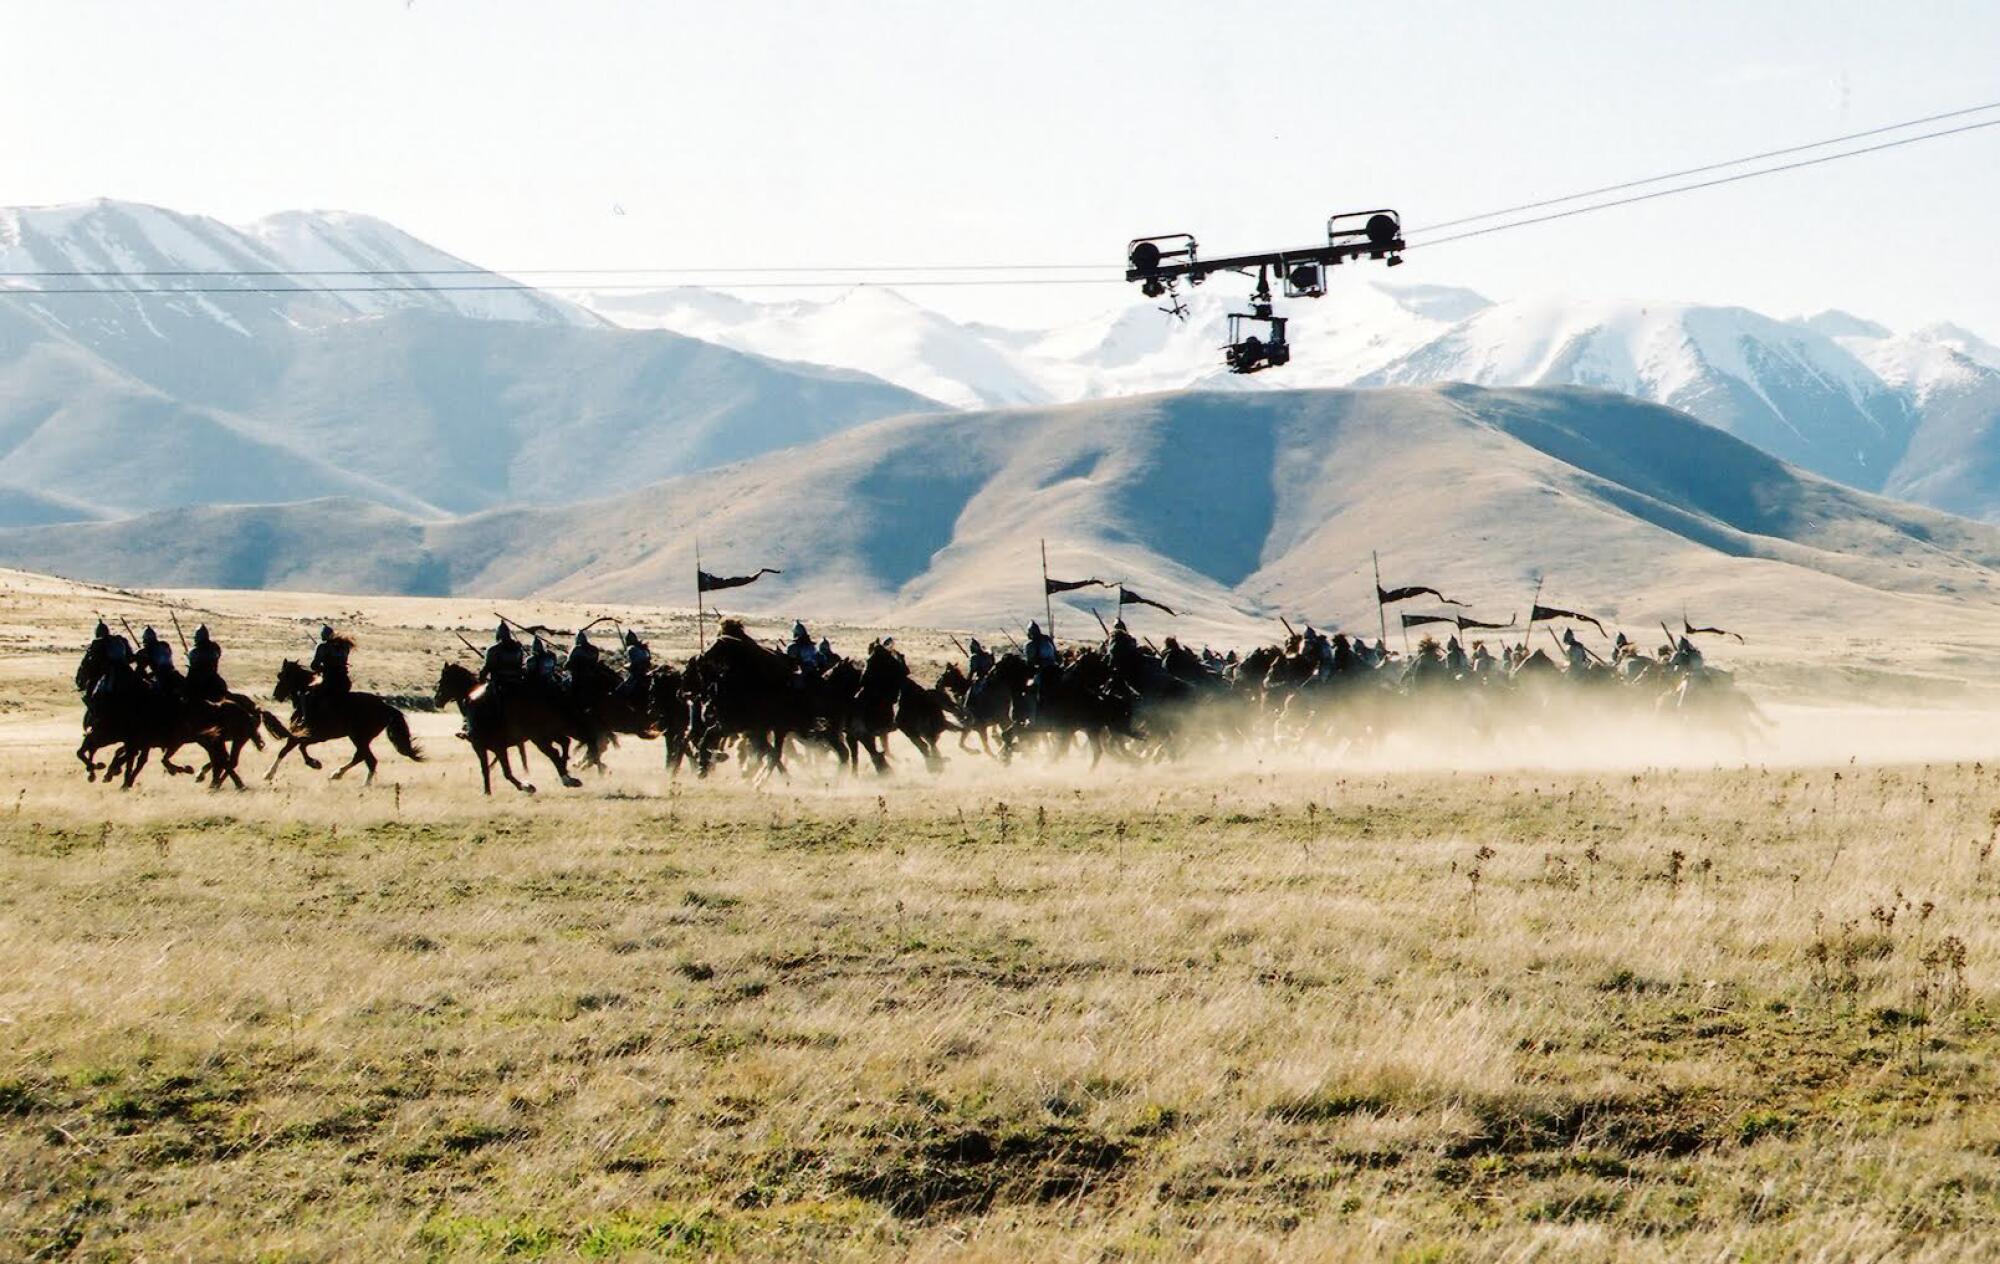 Horseback riders are filmed from above in "The Lord of the Rings."